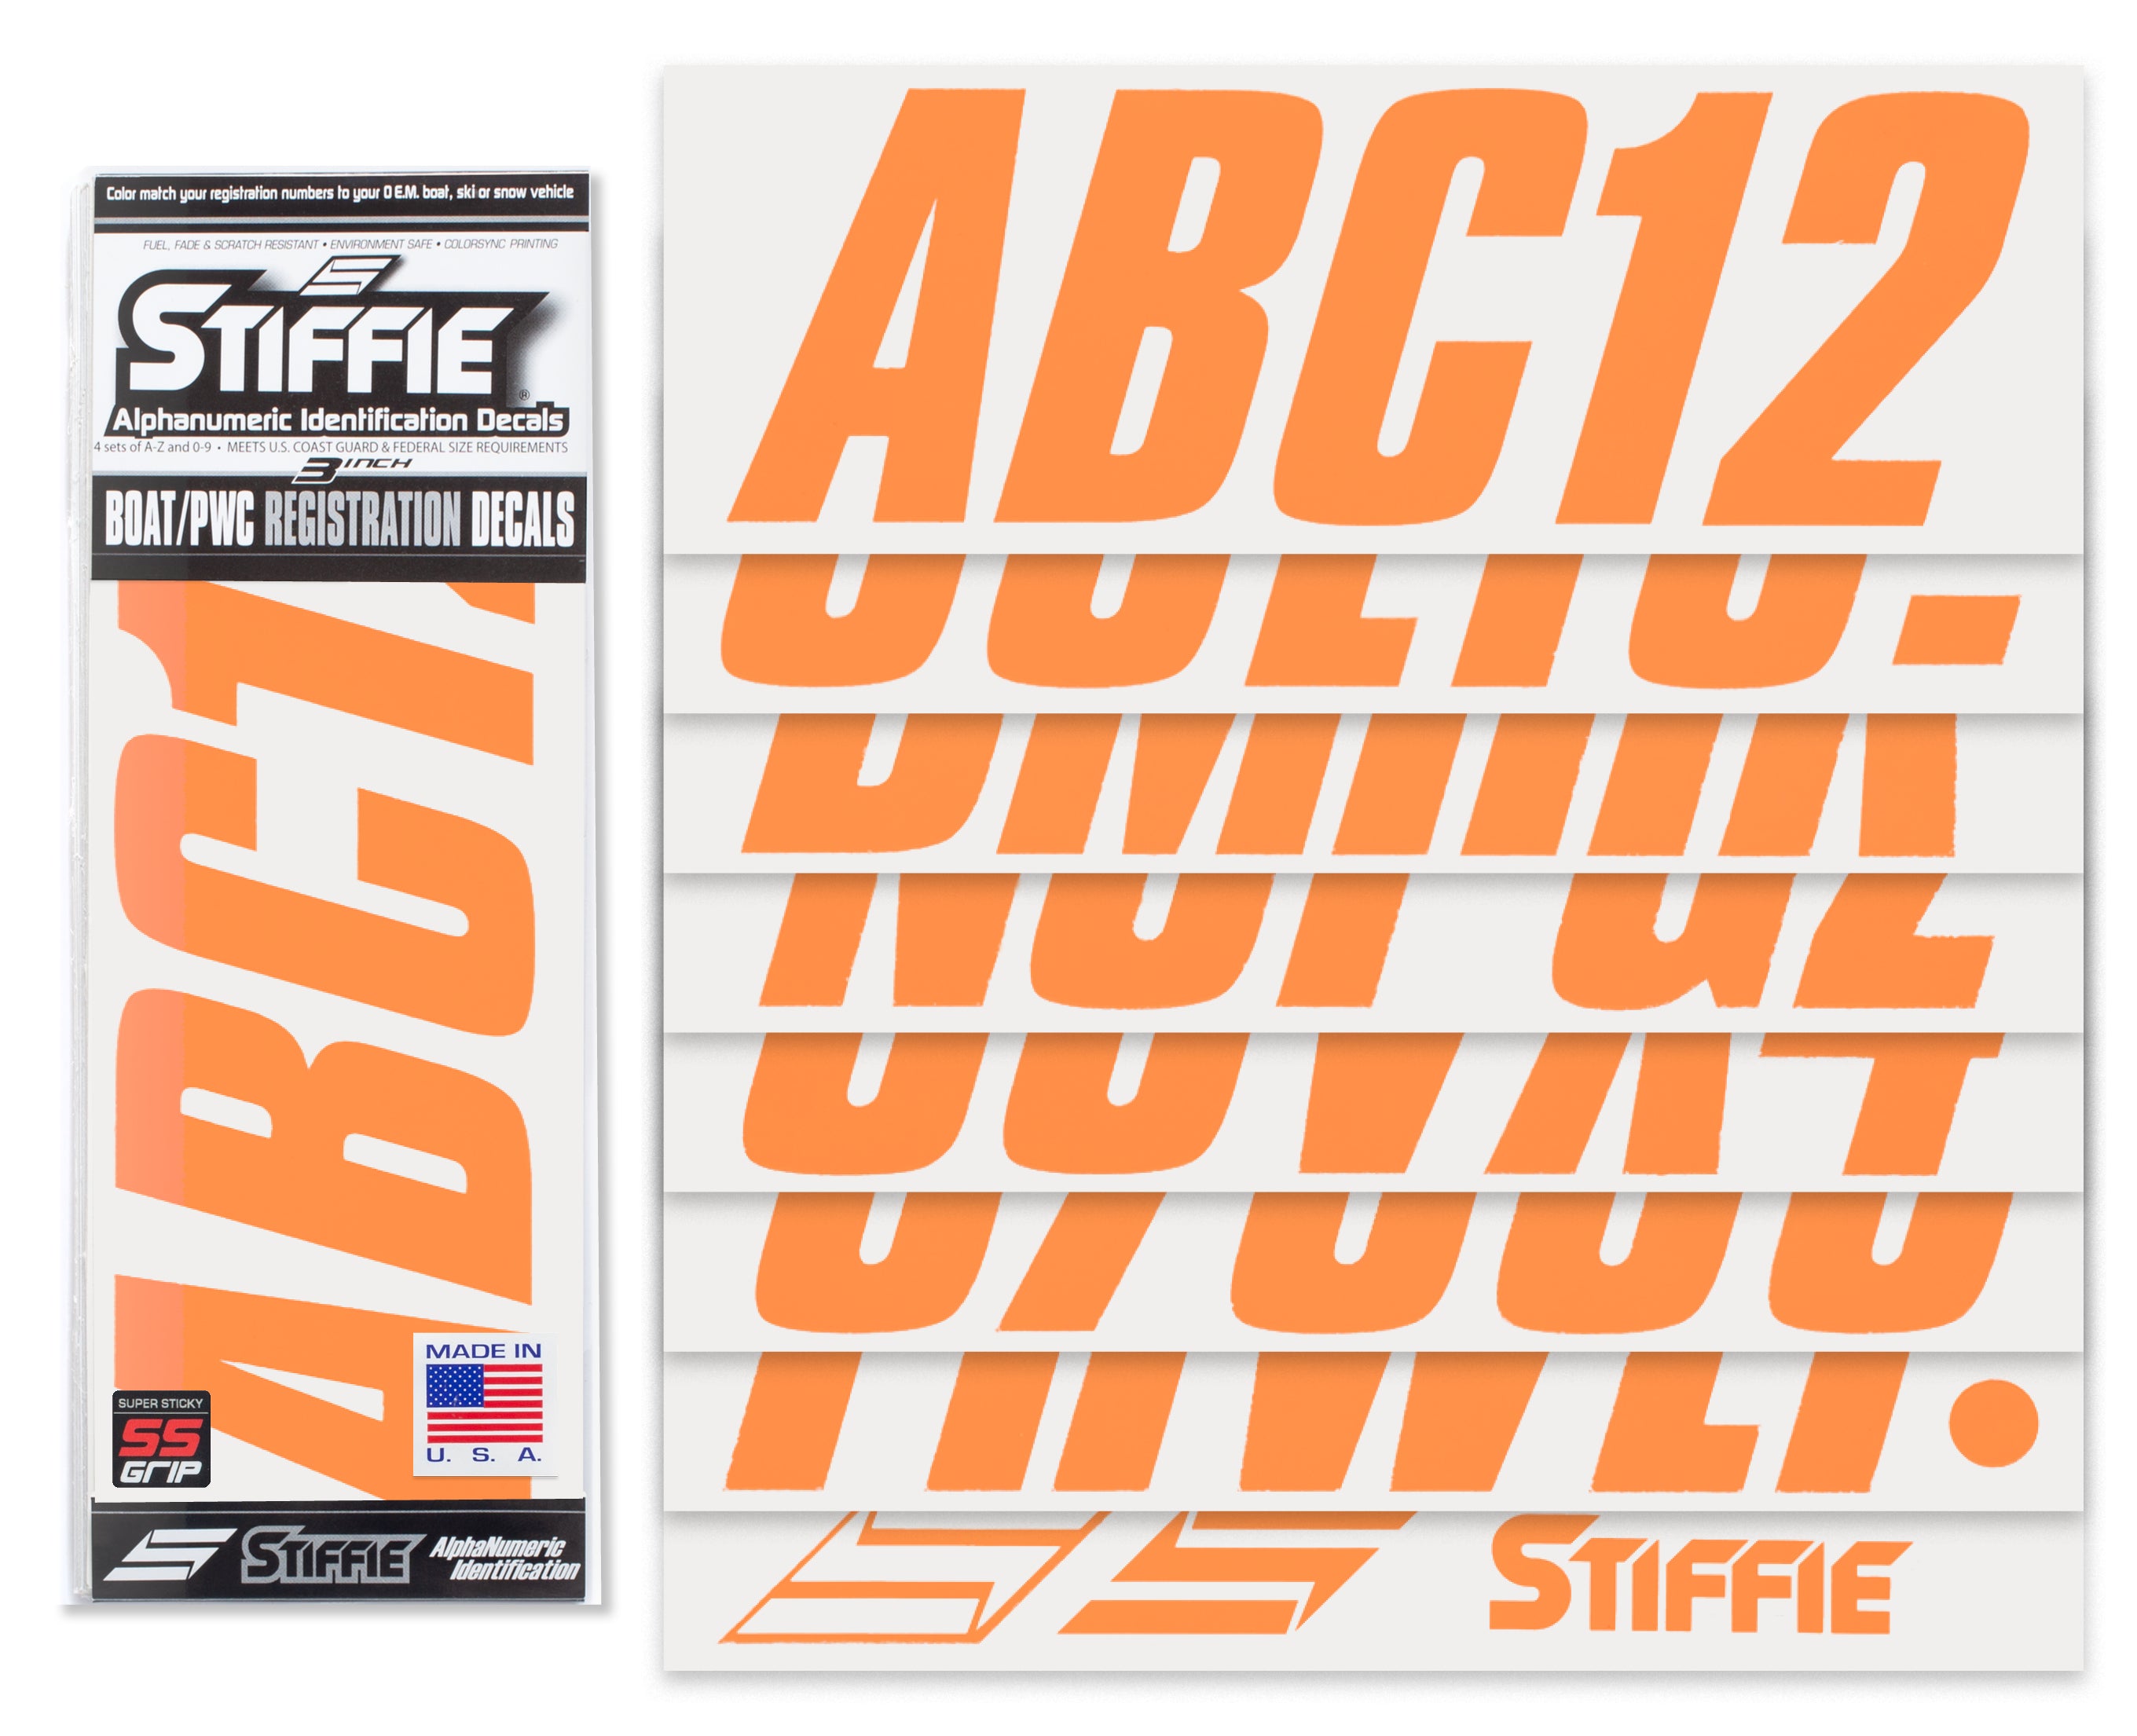 STIFFIE Shift Orange Crush Super Sticky 3" Alpha Numeric Registration Identification Numbers Stickers Decals for Sea-Doo Spark, Inflatable Boats, Ribs, Hypalon/PVC, PWC and Boats.